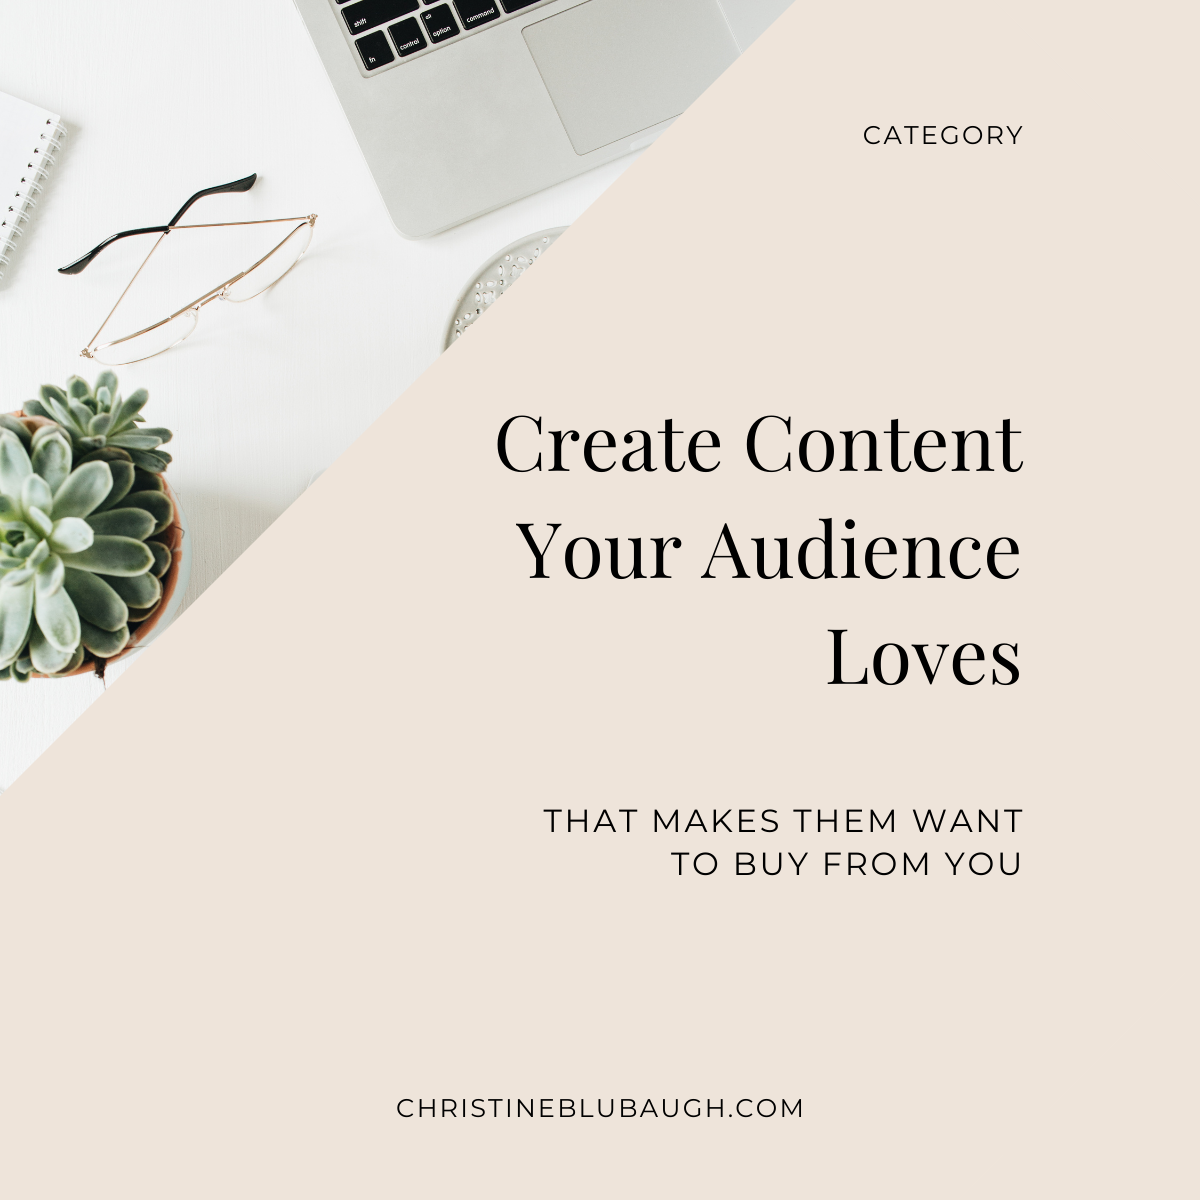 How to Create Content Your Audience Loves (that makes them want to hire you)